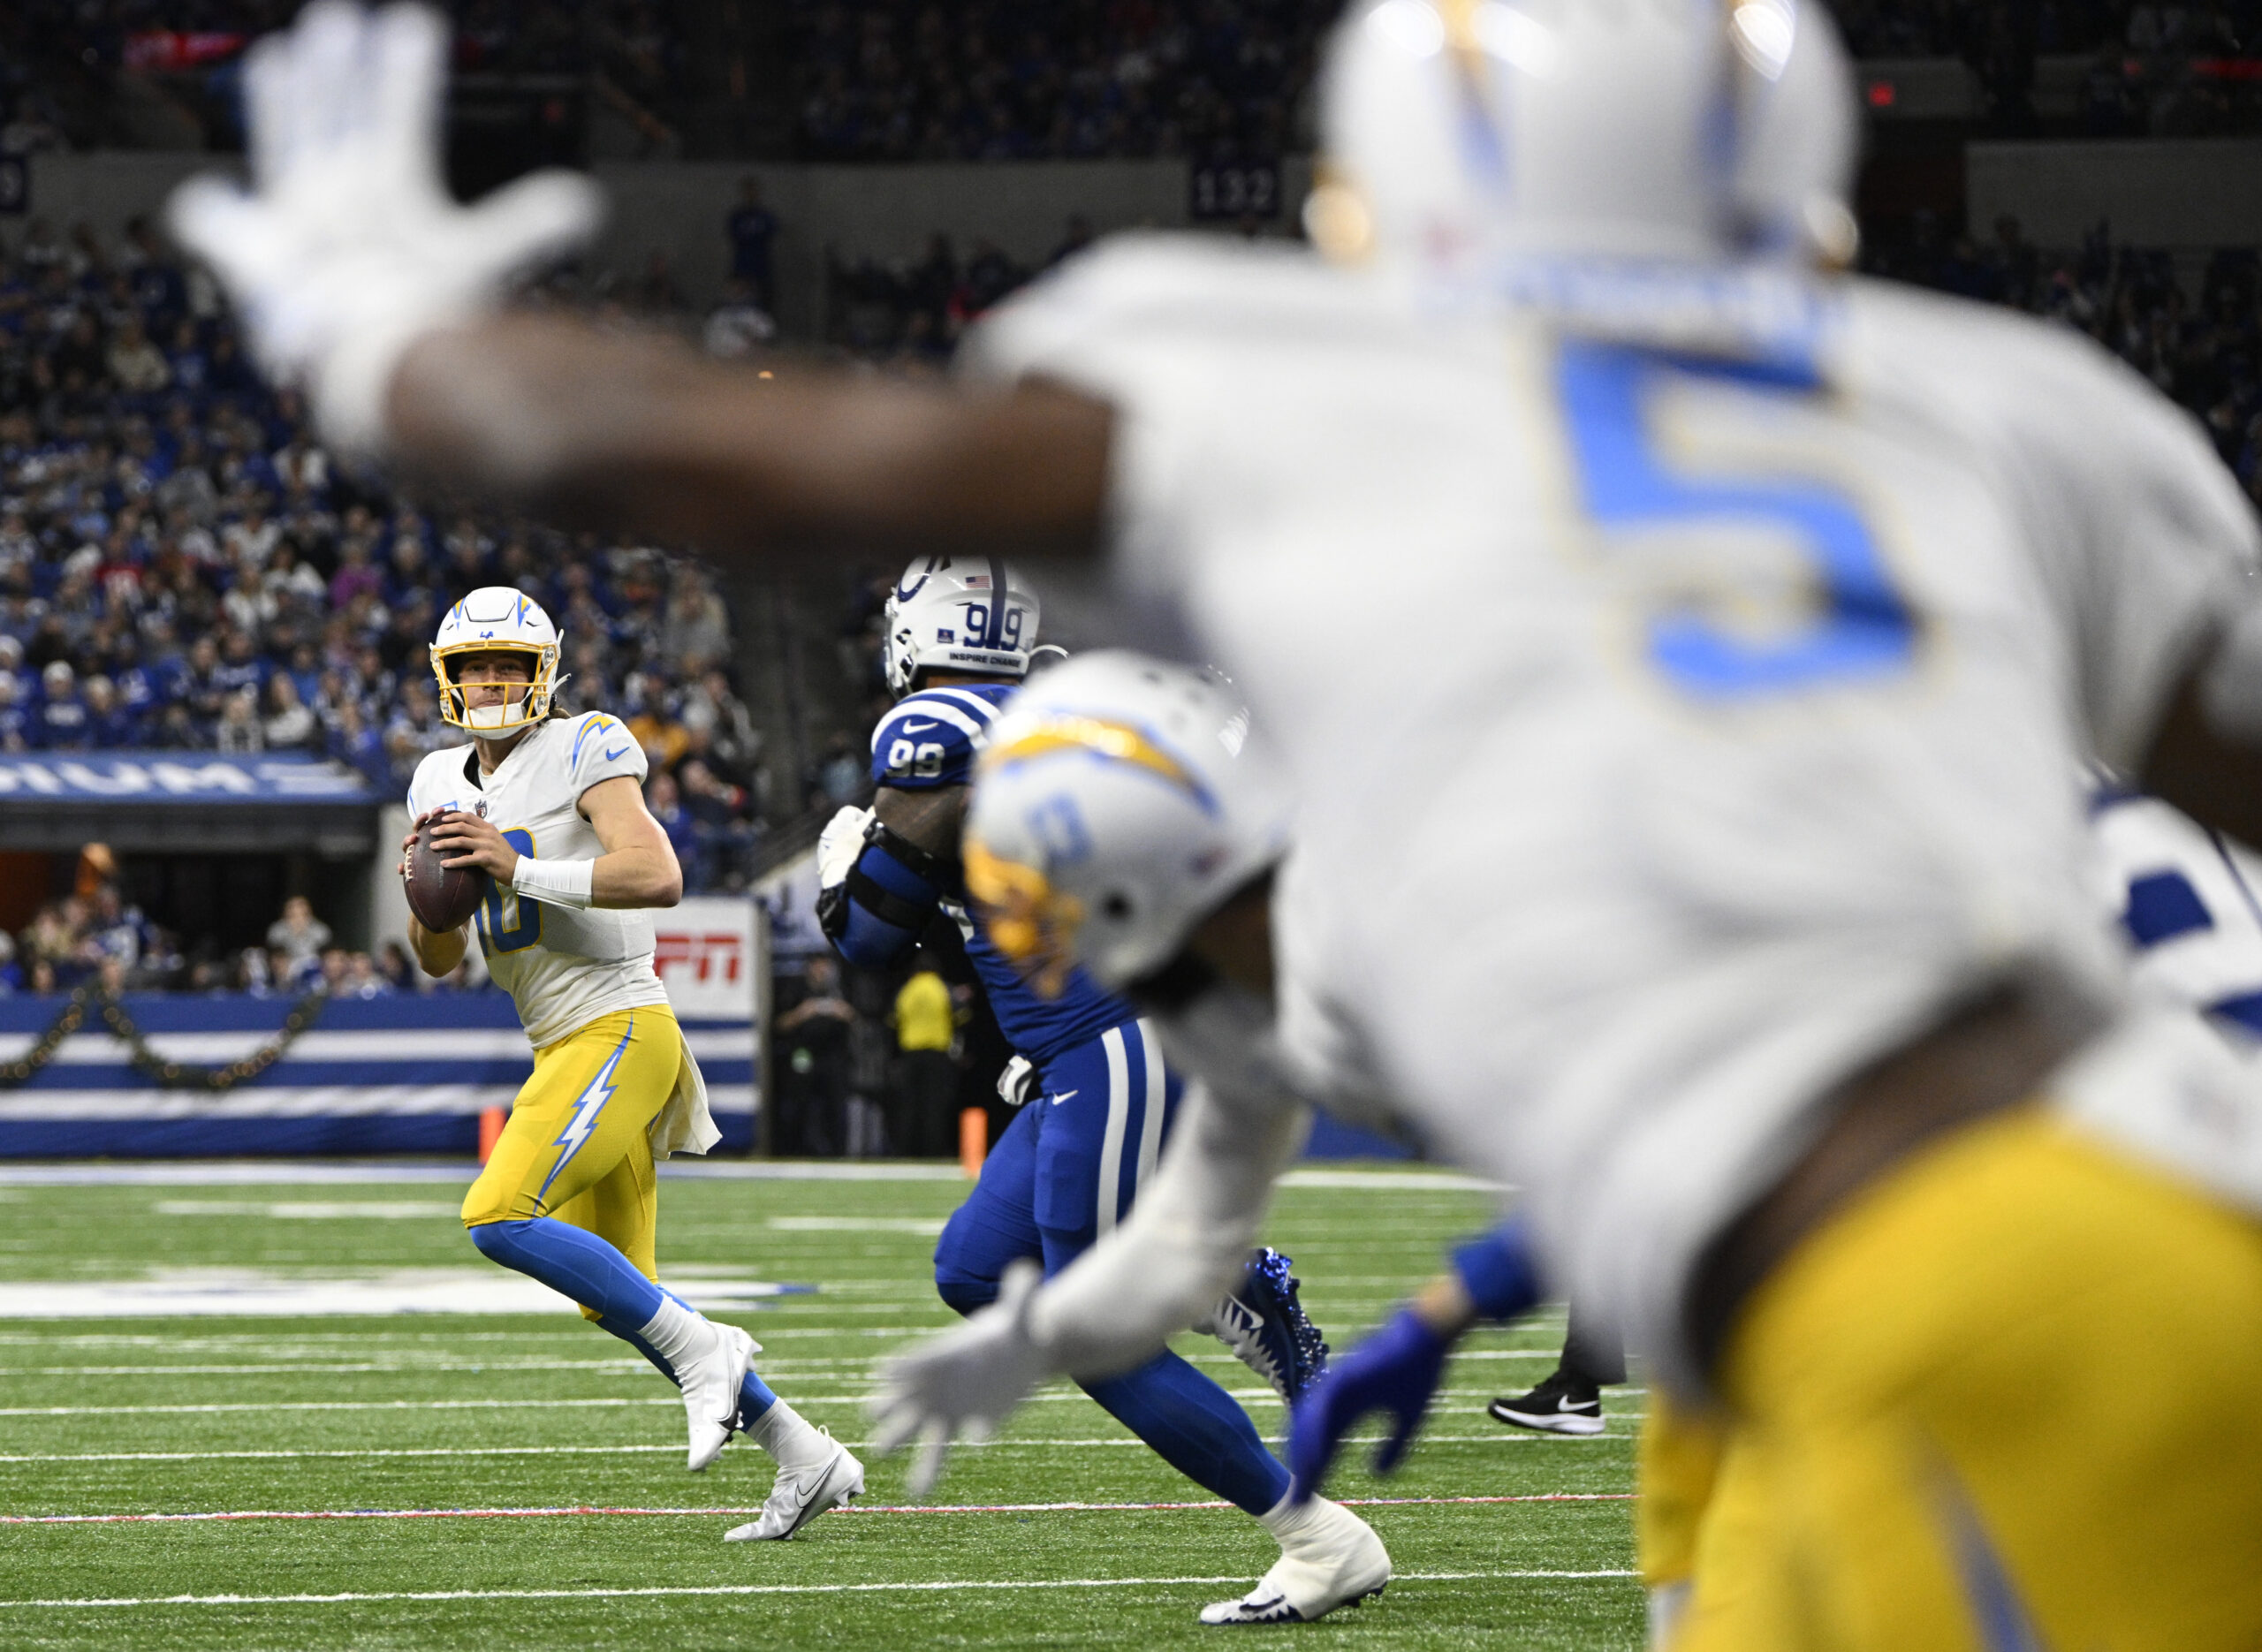 2019 NFL playoffs: Charting the Chargers' favorite offensive